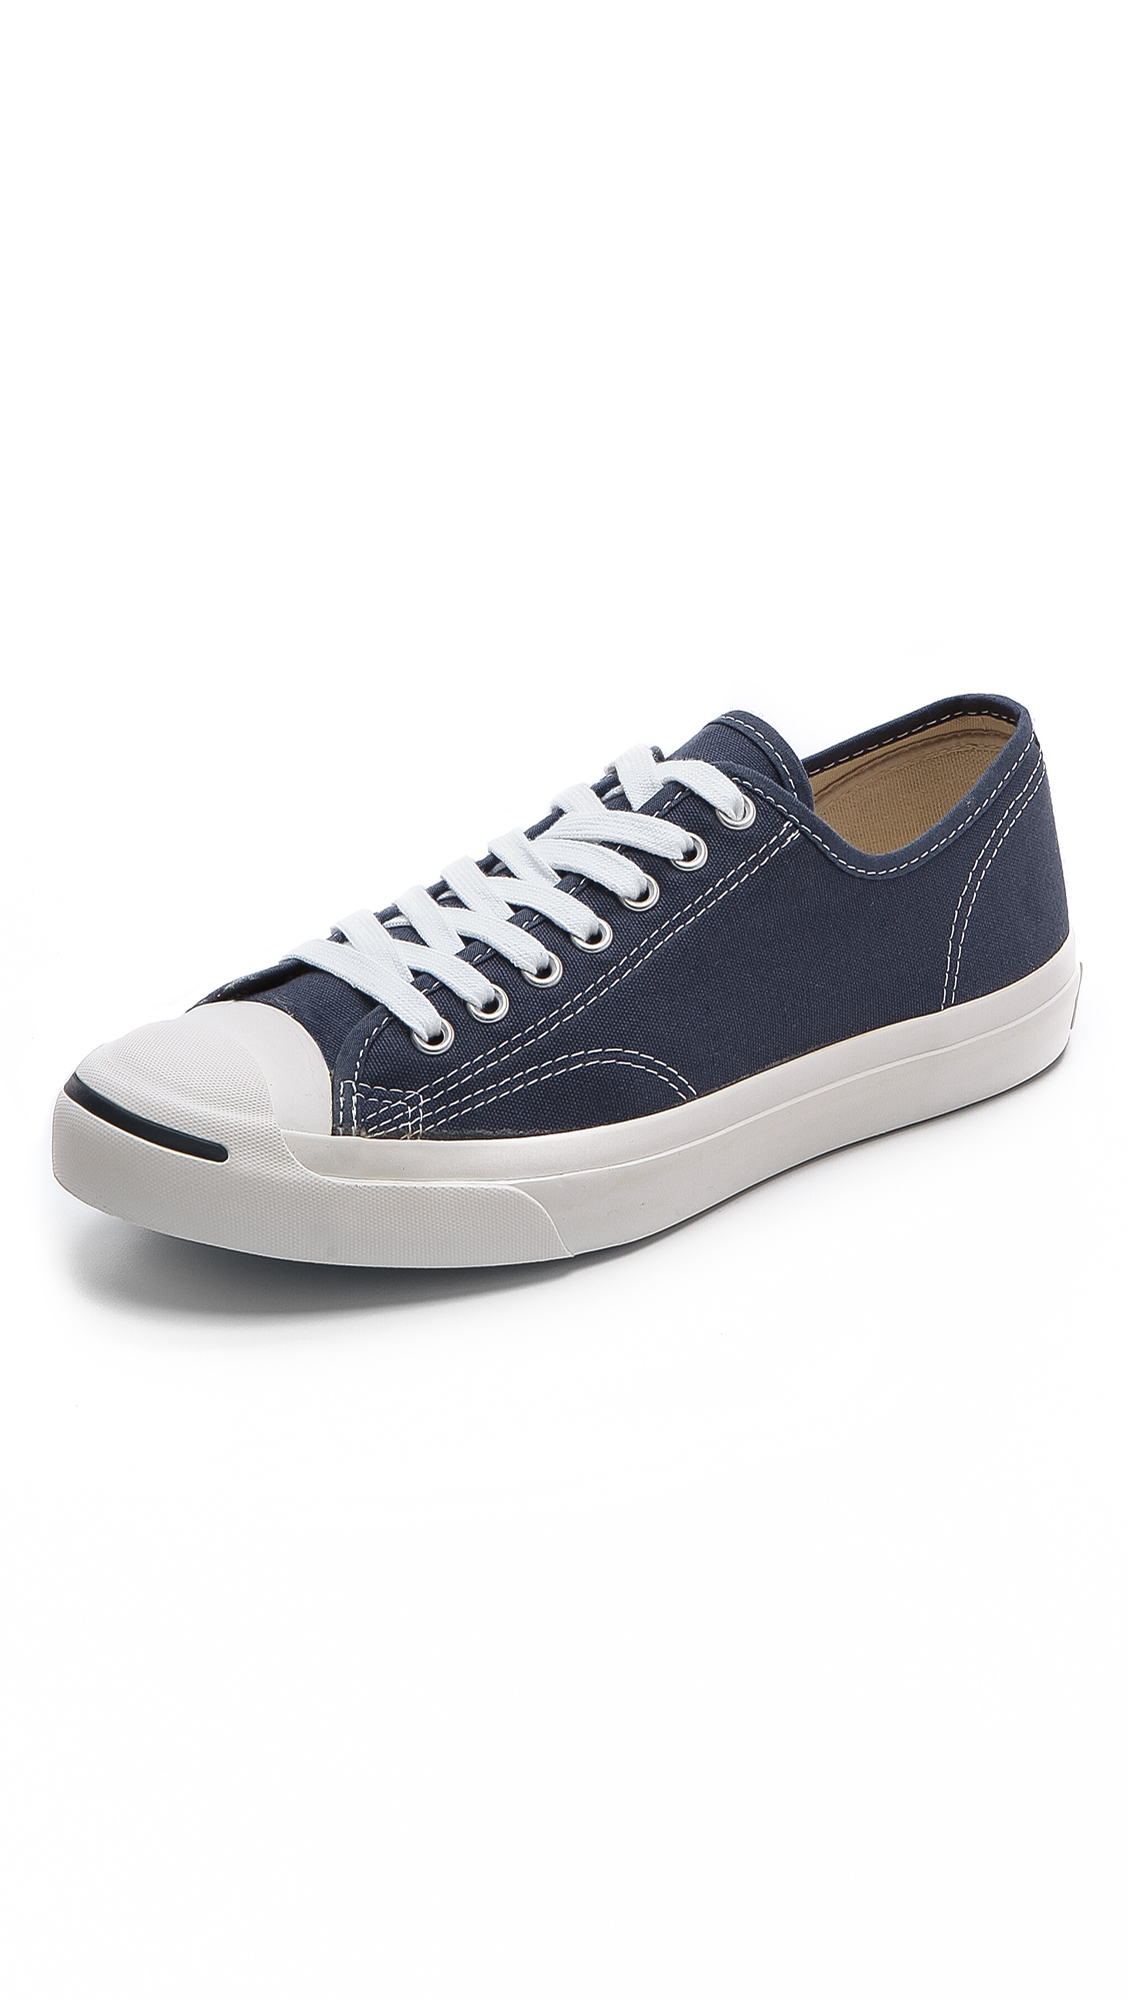 Lyst - Converse Jack Purcell Canvas Sneakers in Blue for Men